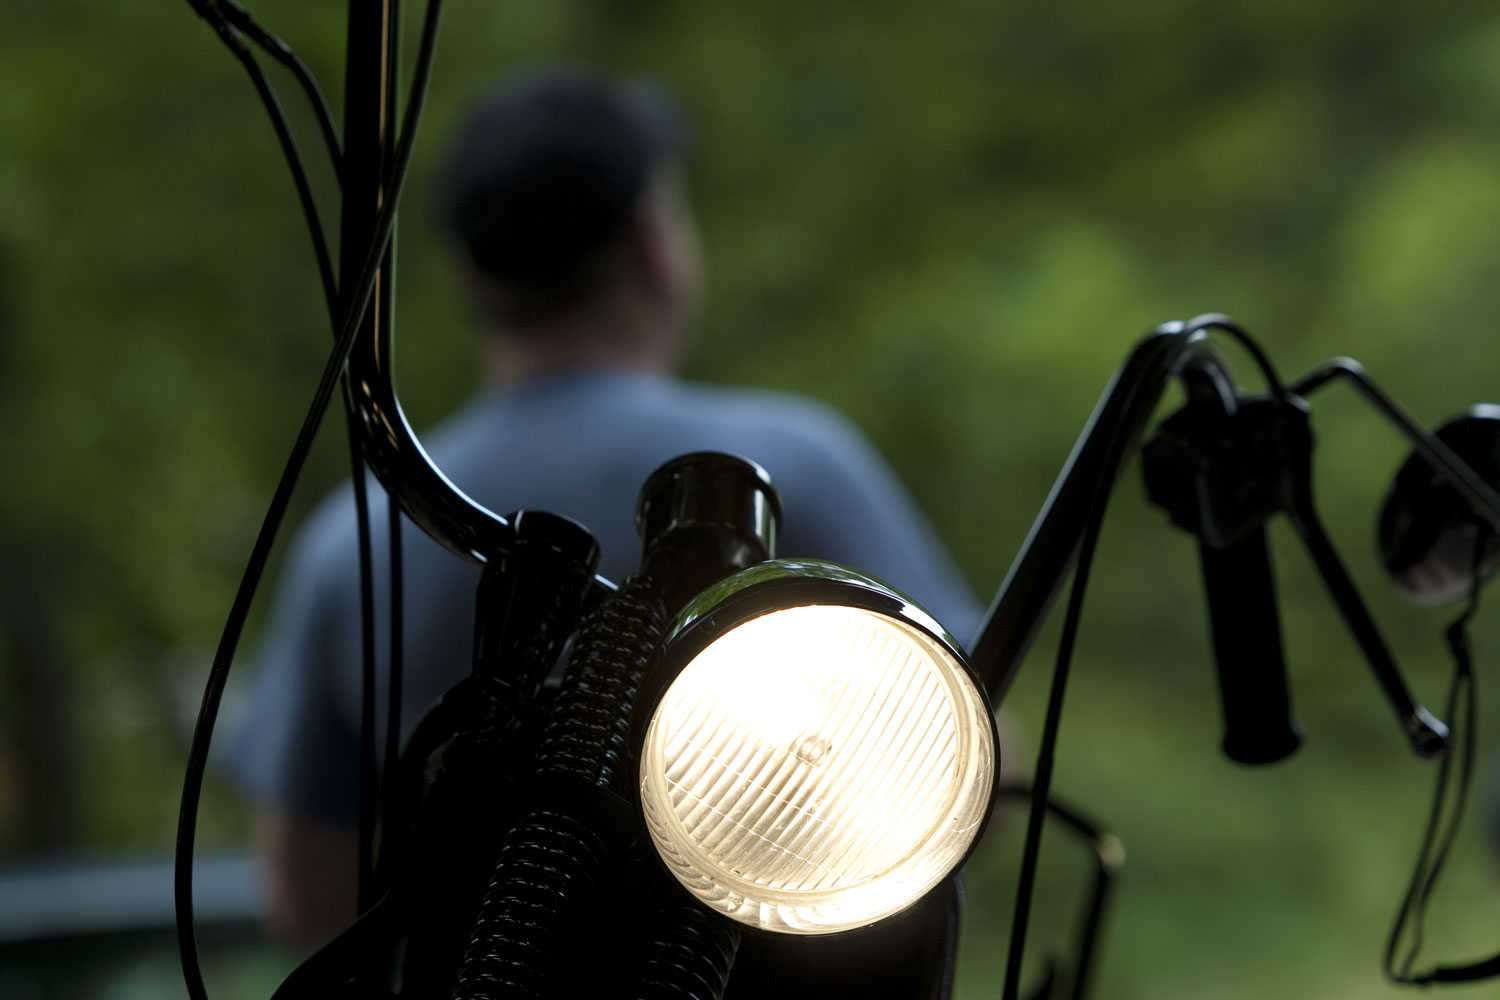 A motorcycle with its light on